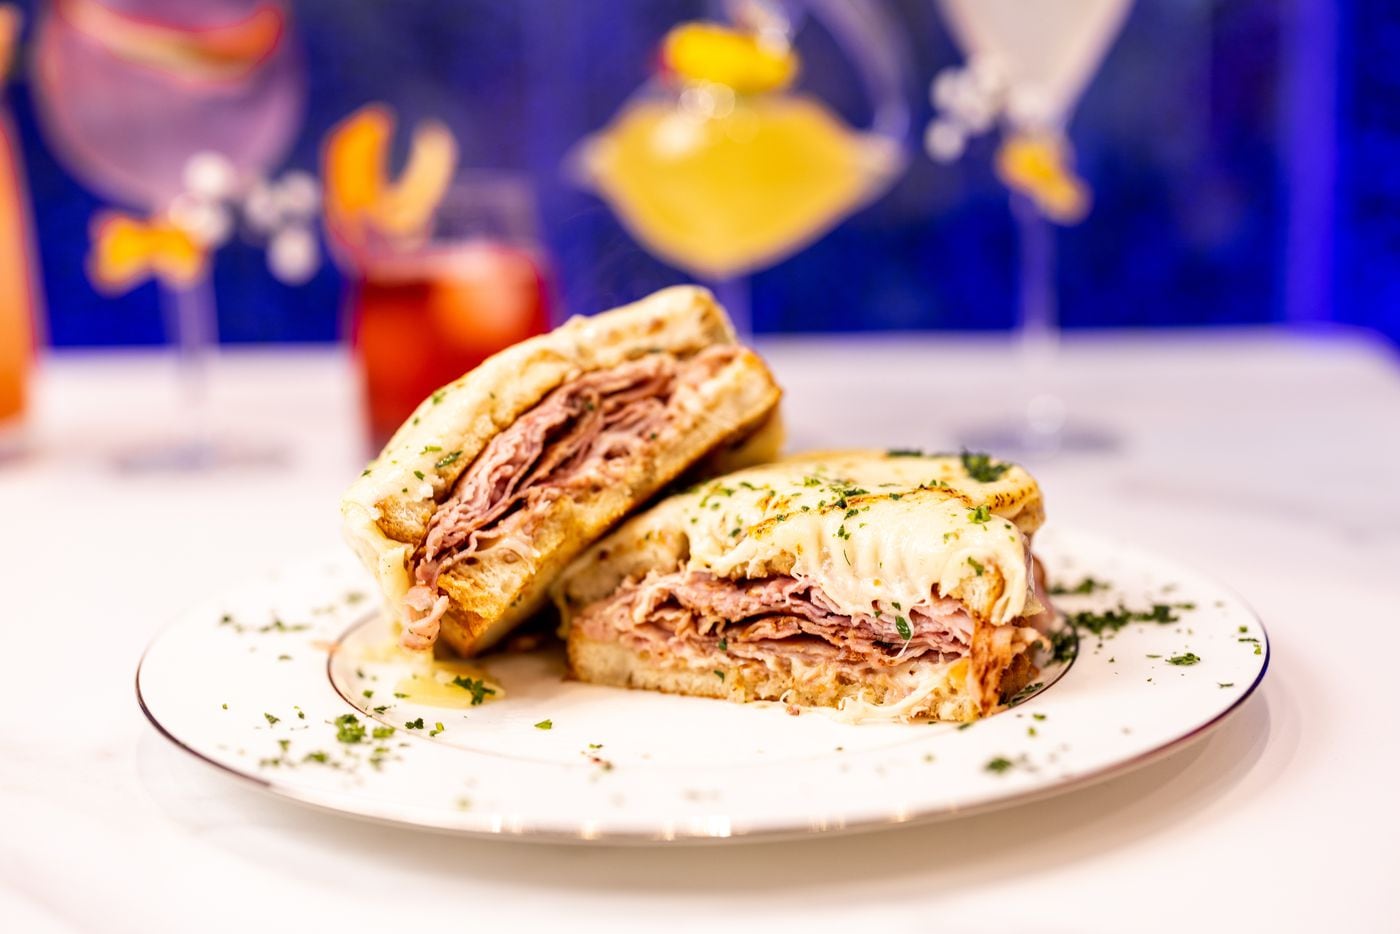 Among the sandwiches listed on La Parisienne French Bistro's menu in Frisco, the $15 Croque...